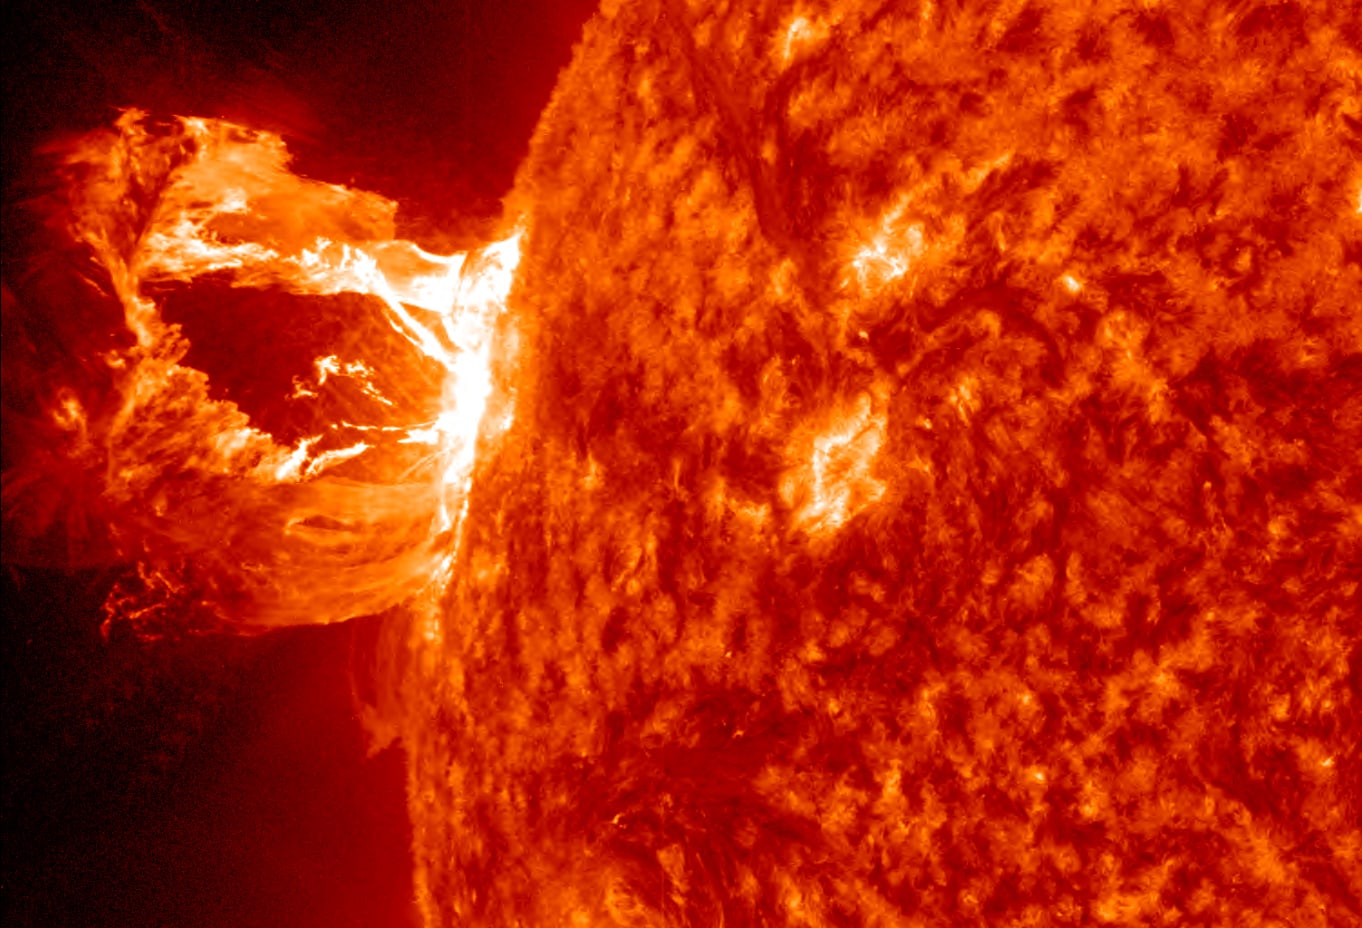 A Massive Solar Storm Might Strike The Earth Triggering A Potential Internet Meltdown